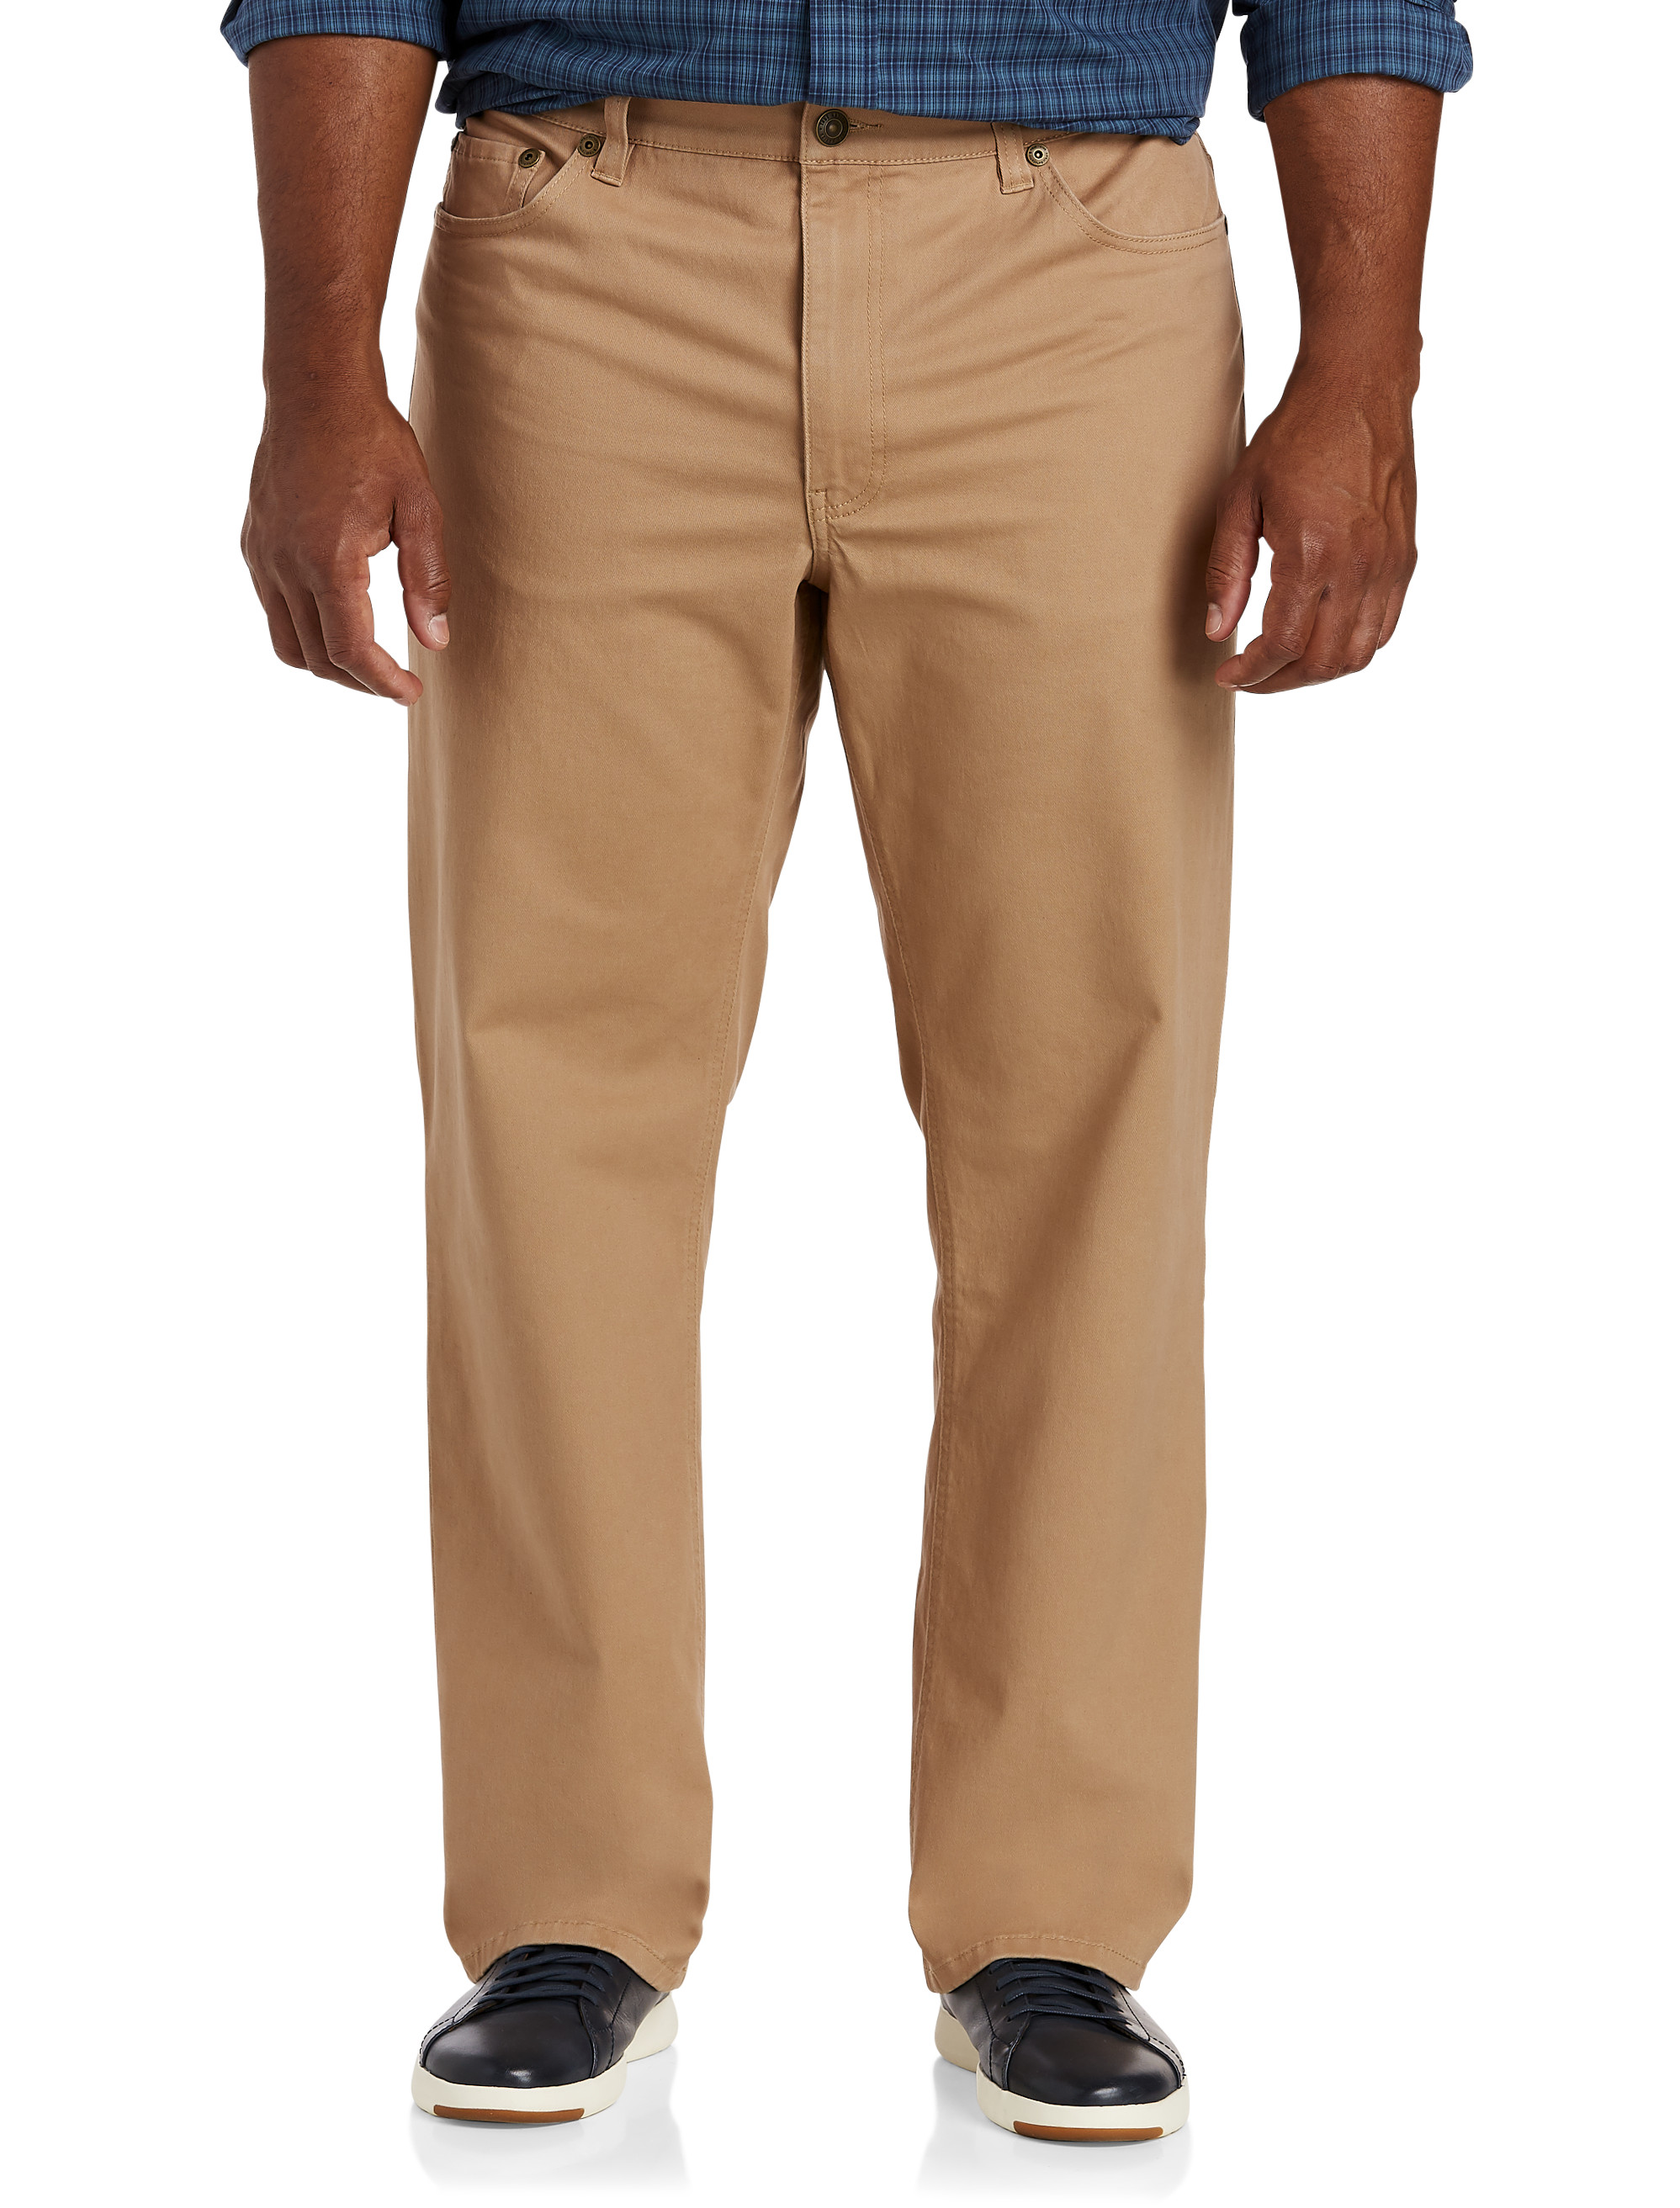 A New Day Solid Brown Casual Pants Size 16 - 46% off